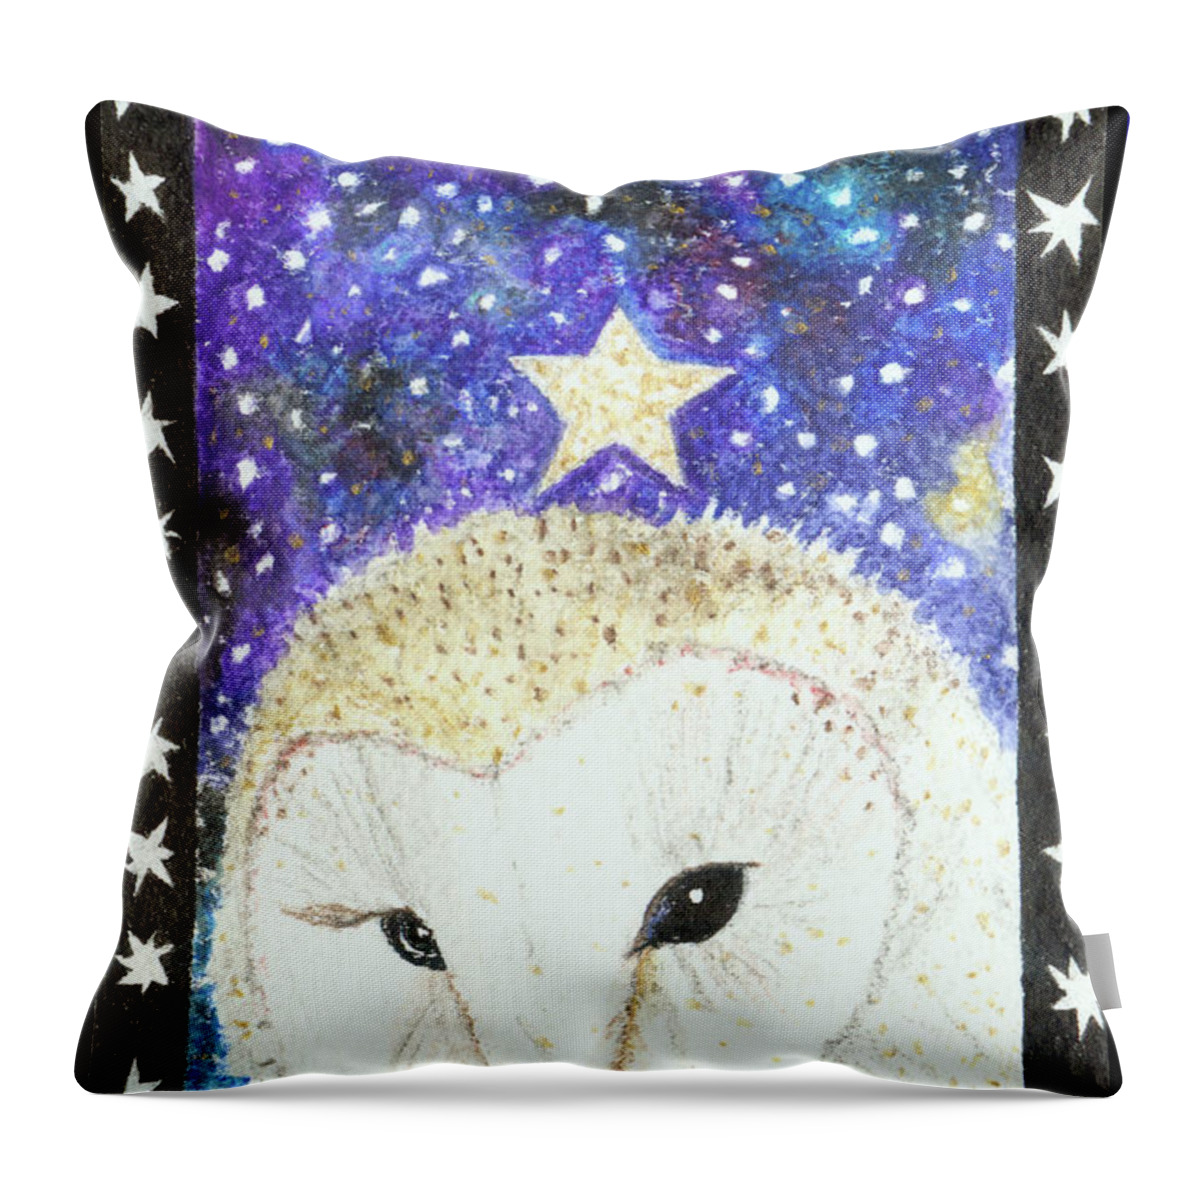 Lise Winne Throw Pillow featuring the painting Star of the Night by Lise Winne